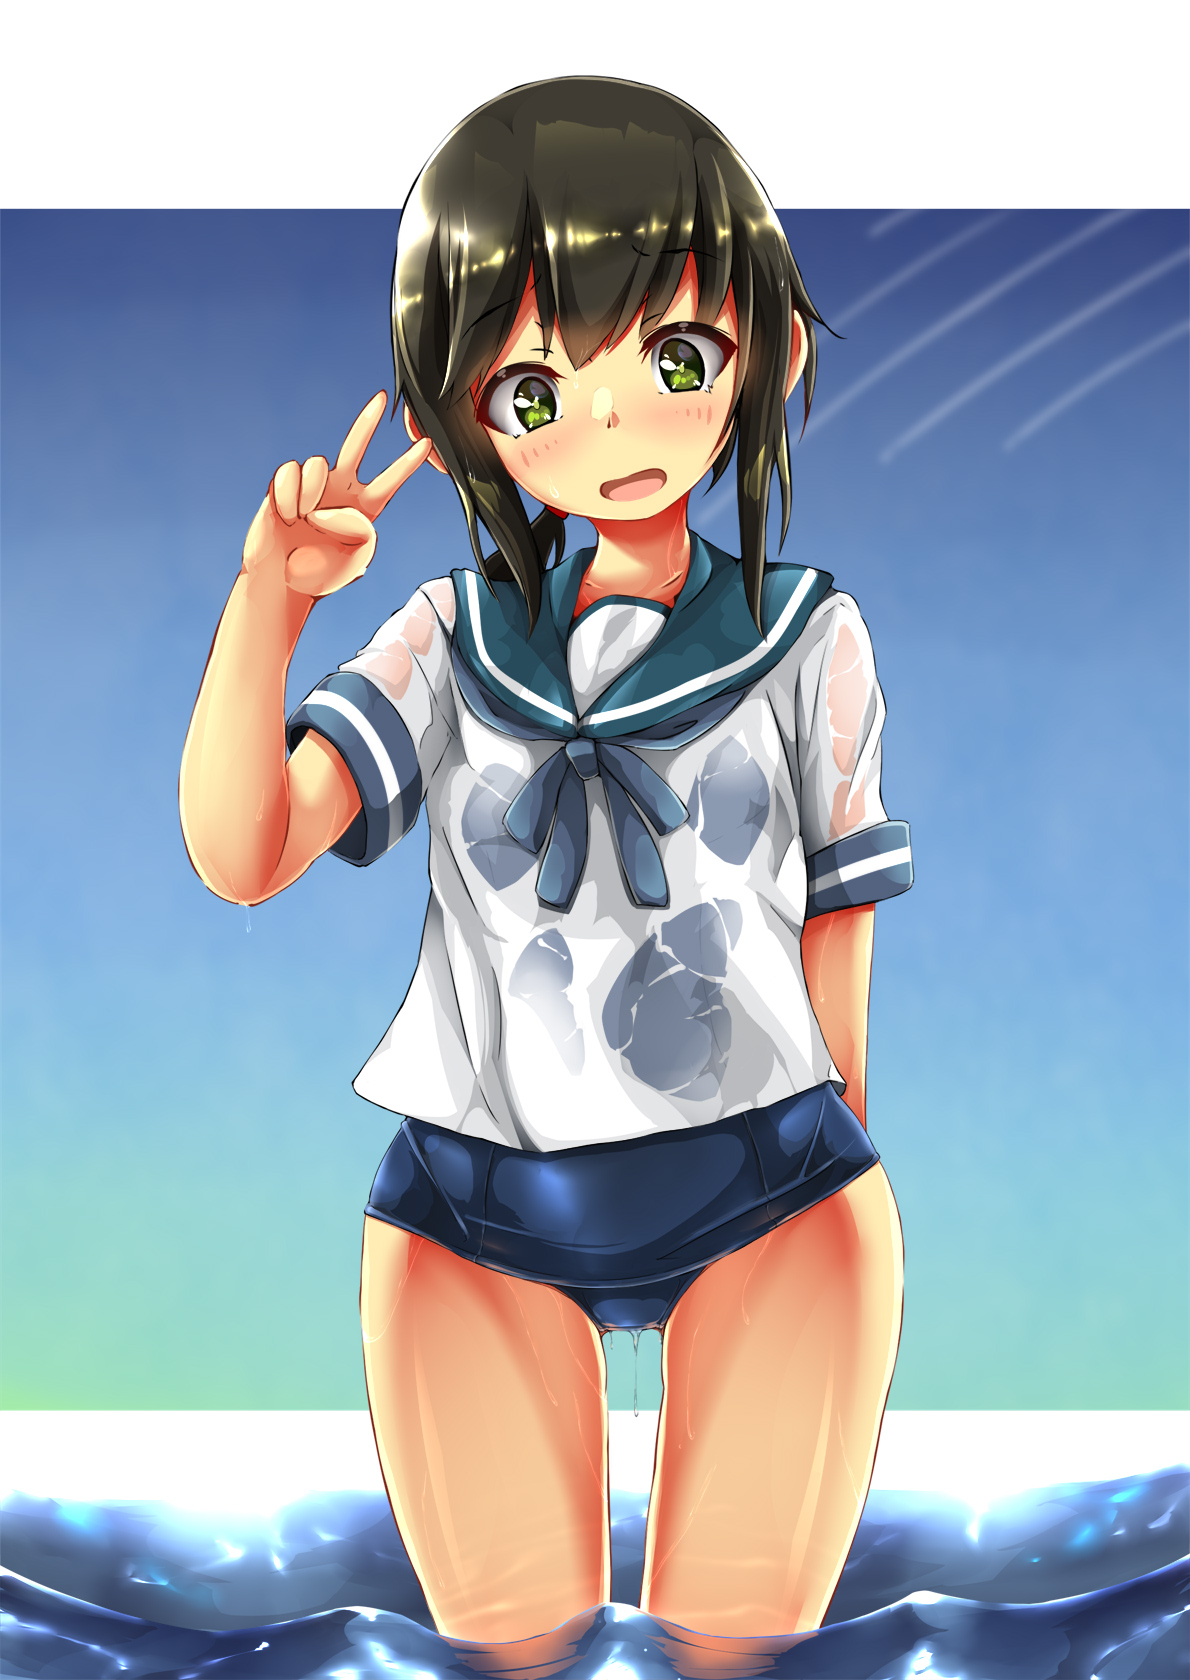 Anime 1190x1680 anime anime girls Kantai Collection Fubuki (KanColle) ponytail brunette solo artwork digital art fan art peace sign wet clothing water standing in water